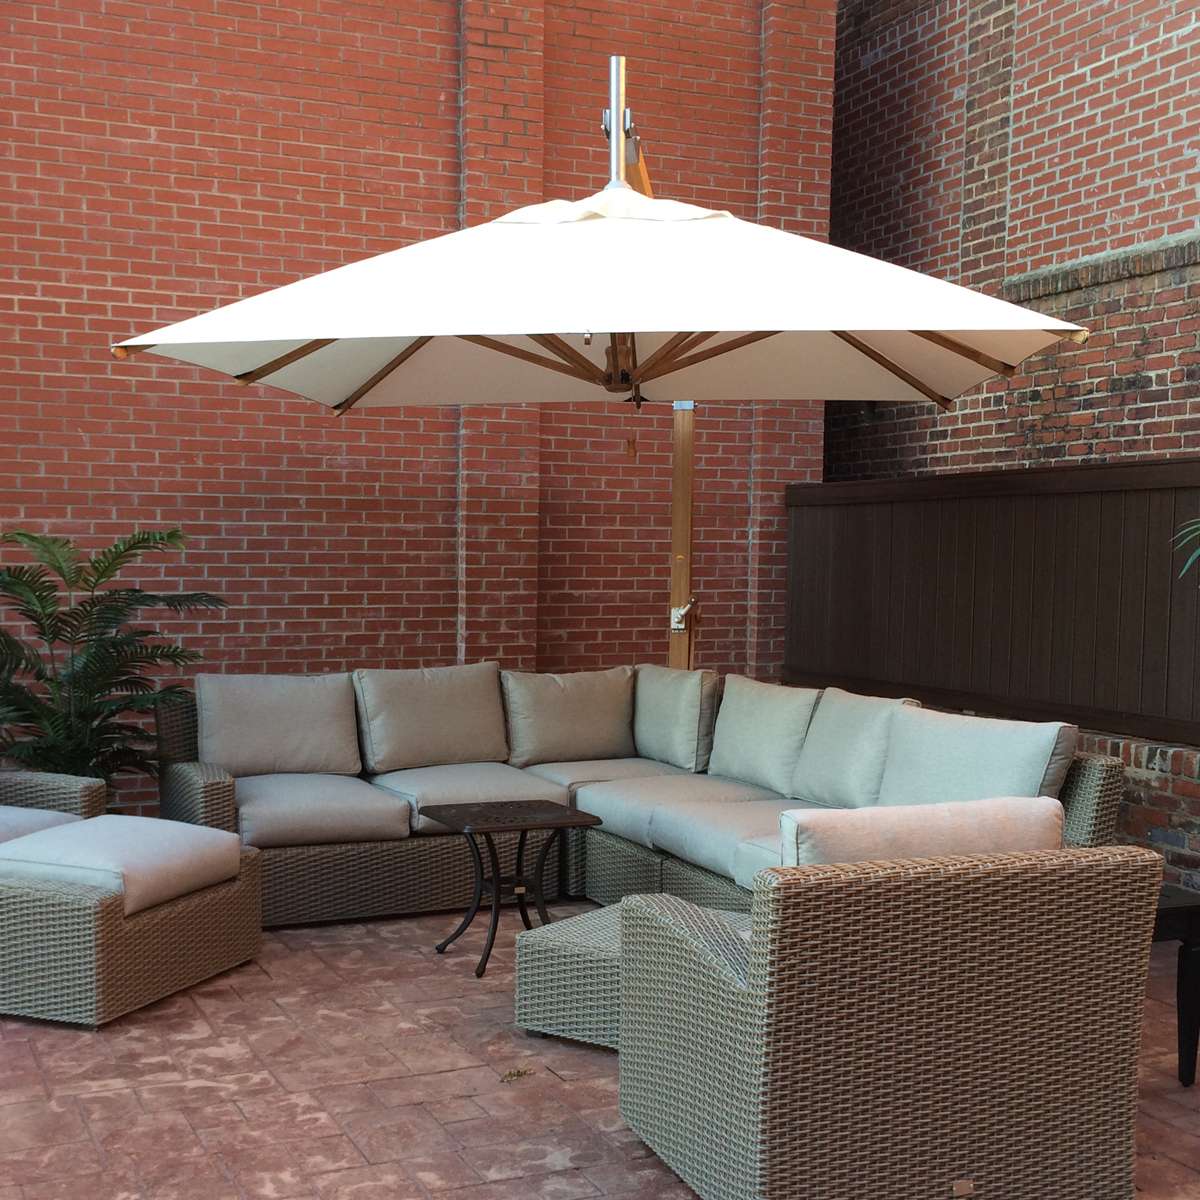 Large outdoor umbrella over lounging furniture against brick wall